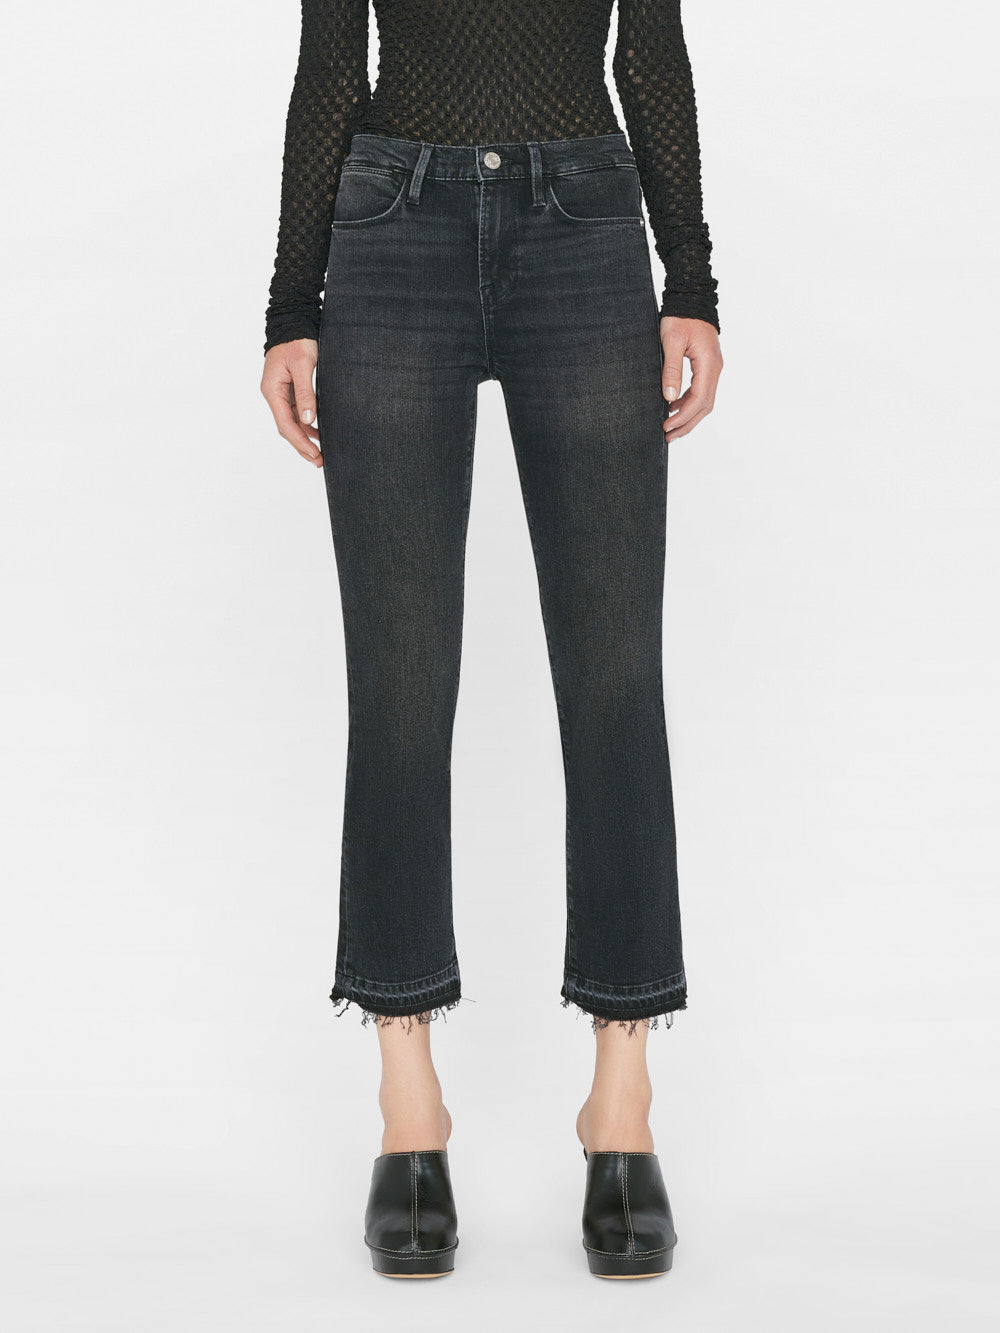 A woman wearing Frame's Le High Straight Released Hem - Hutchison black jeans with frayed hems.